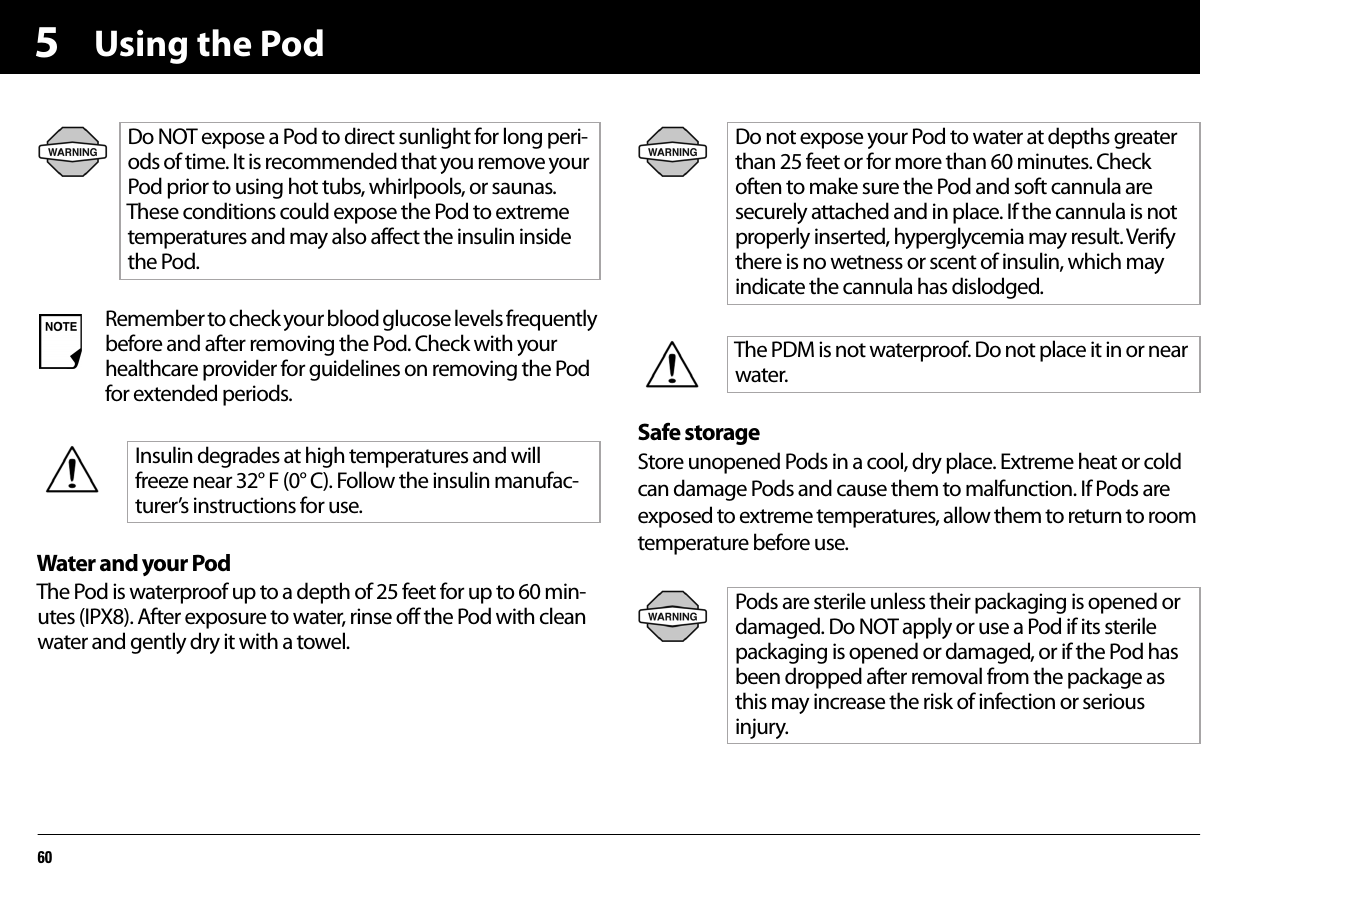 Using the Pod605Water and your PodThe Pod is waterproof up to a depth of 25 feet for up to 60 min-utes (IPX8). After exposure to water, rinse off the Pod with clean water and gently dry it with a towel.Safe storageStore unopened Pods in a cool, dry place. Extreme heat or cold can damage Pods and cause them to malfunction. If Pods are exposed to extreme temperatures, allow them to return to room temperature before use.Do NOT expose a Pod to direct sunlight for long peri-ods of time. It is recommended that you remove your Pod prior to using hot tubs, whirlpools, or saunas. These conditions could expose the Pod to extreme temperatures and may also affect the insulin inside the Pod.Remember to check your blood glucose levels frequently before and after removing the Pod. Check with your healthcare provider for guidelines on removing the Pod for extended periods.Insulin degrades at high temperatures and will freeze near 32° F (0° C). Follow the insulin manufac-turer’s instructions for use.Do not expose your Pod to water at depths greater than 25 feet or for more than 60 minutes. Check often to make sure the Pod and soft cannula are securely attached and in place. If the cannula is not properly inserted, hyperglycemia may result. Verify there is no wetness or scent of insulin, which may indicate the cannula has dislodged.The PDM is not waterproof. Do not place it in or near water.Pods are sterile unless their packaging is opened ordamaged. Do NOT apply or use a Pod if its sterilepackaging is opened or damaged, or if the Pod hasbeen dropped after removal from the package asthis may increase the risk of infection or seriousinjury.